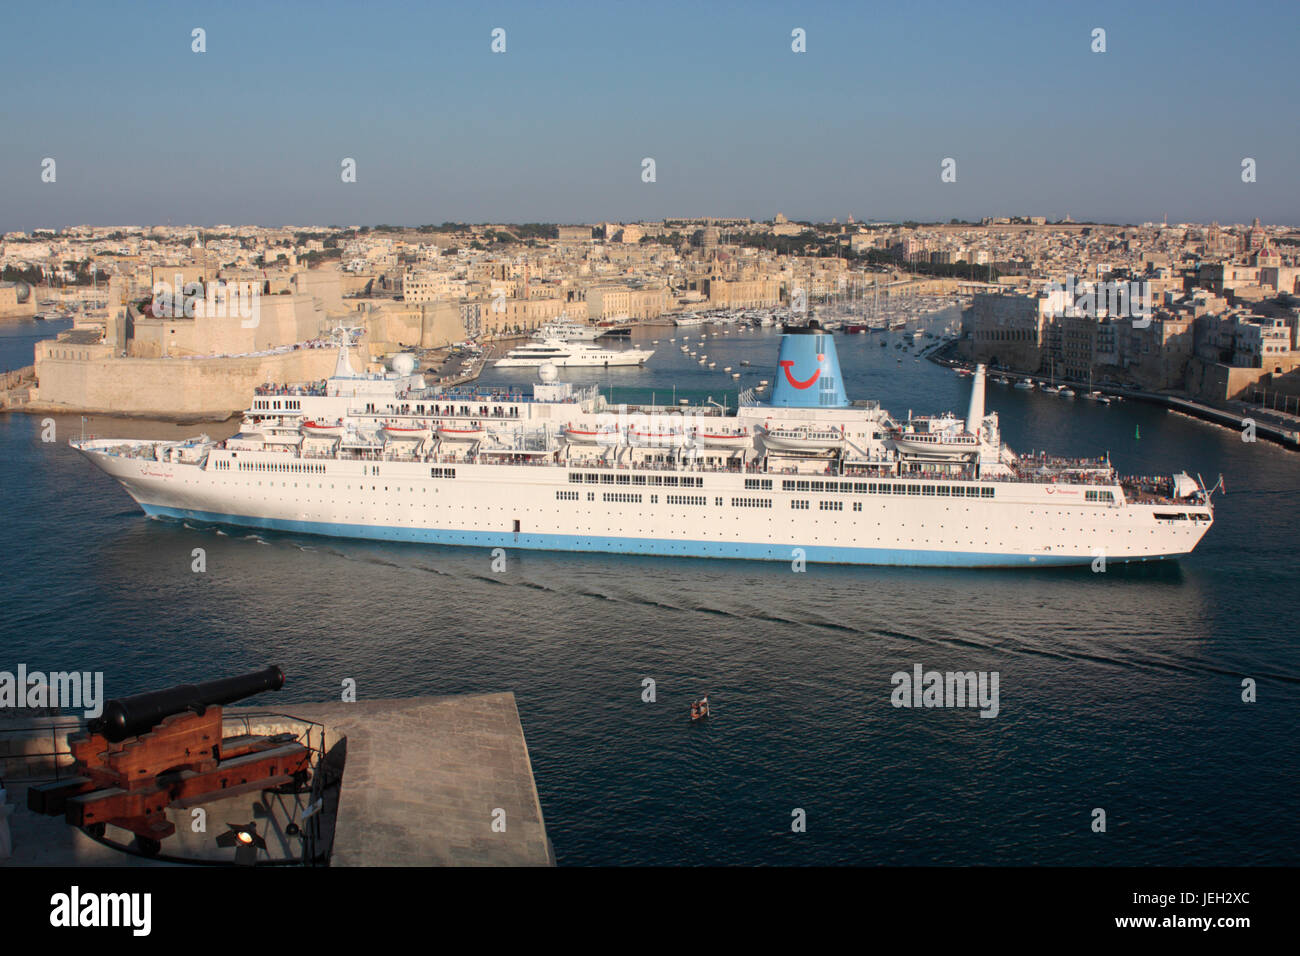 The cruise ship or liner Thomson Spirit departing from Malta's Grand Harbour. Holiday travel in the Mediterranean Sea. Stock Photo